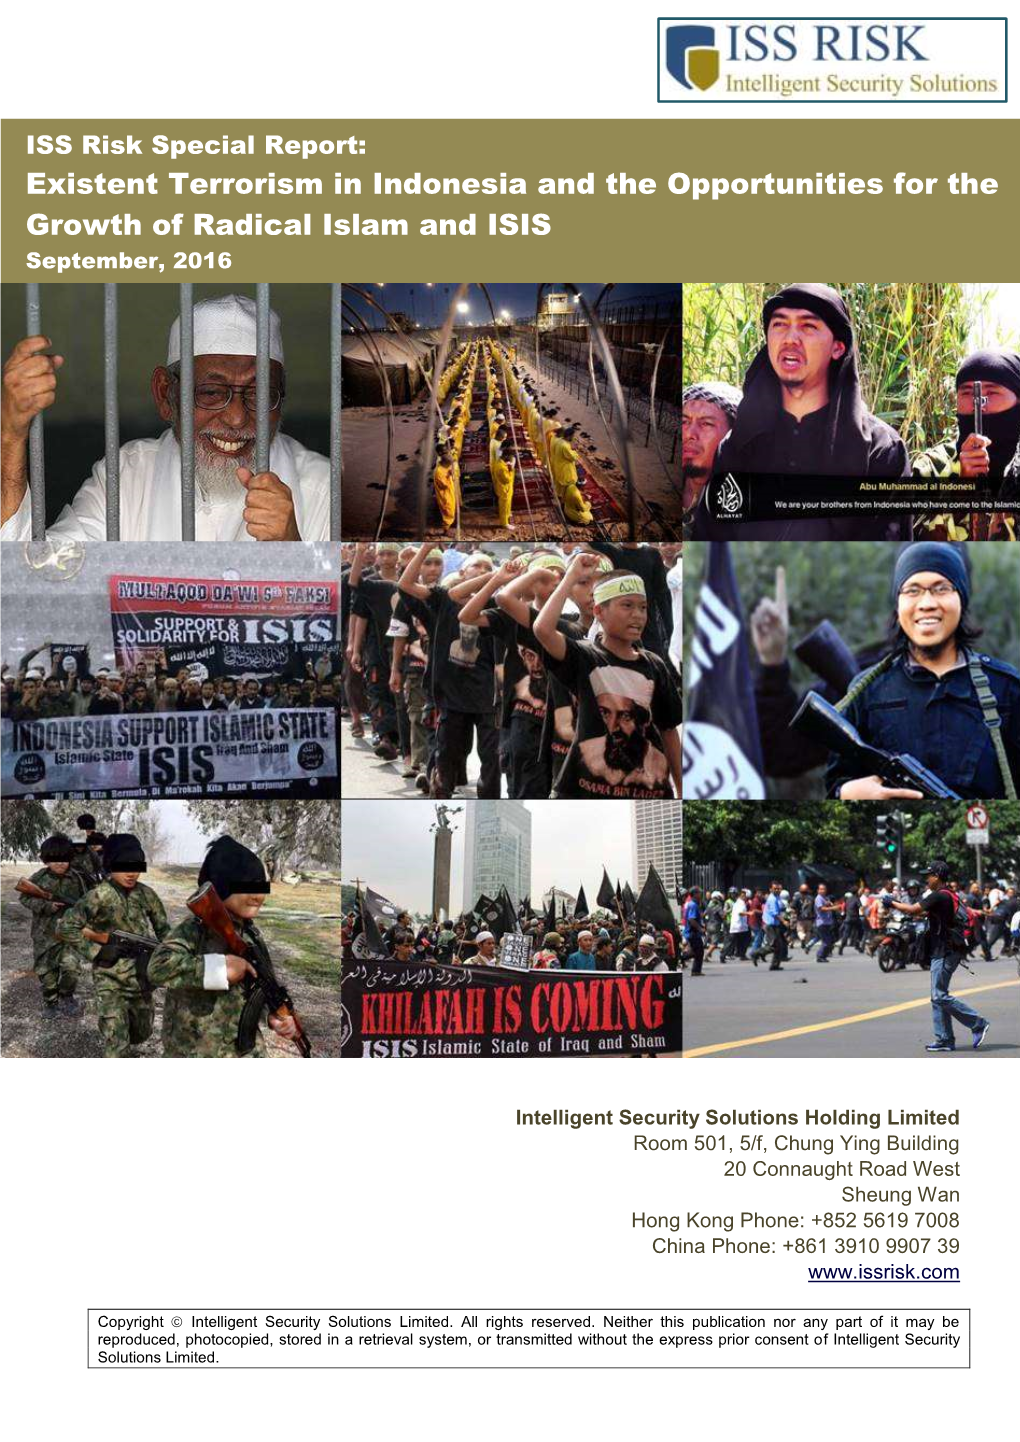 Existent Terrorism in Indonesia and the Opportunities for the Growth of Radical Islam and ISIS September, 2016